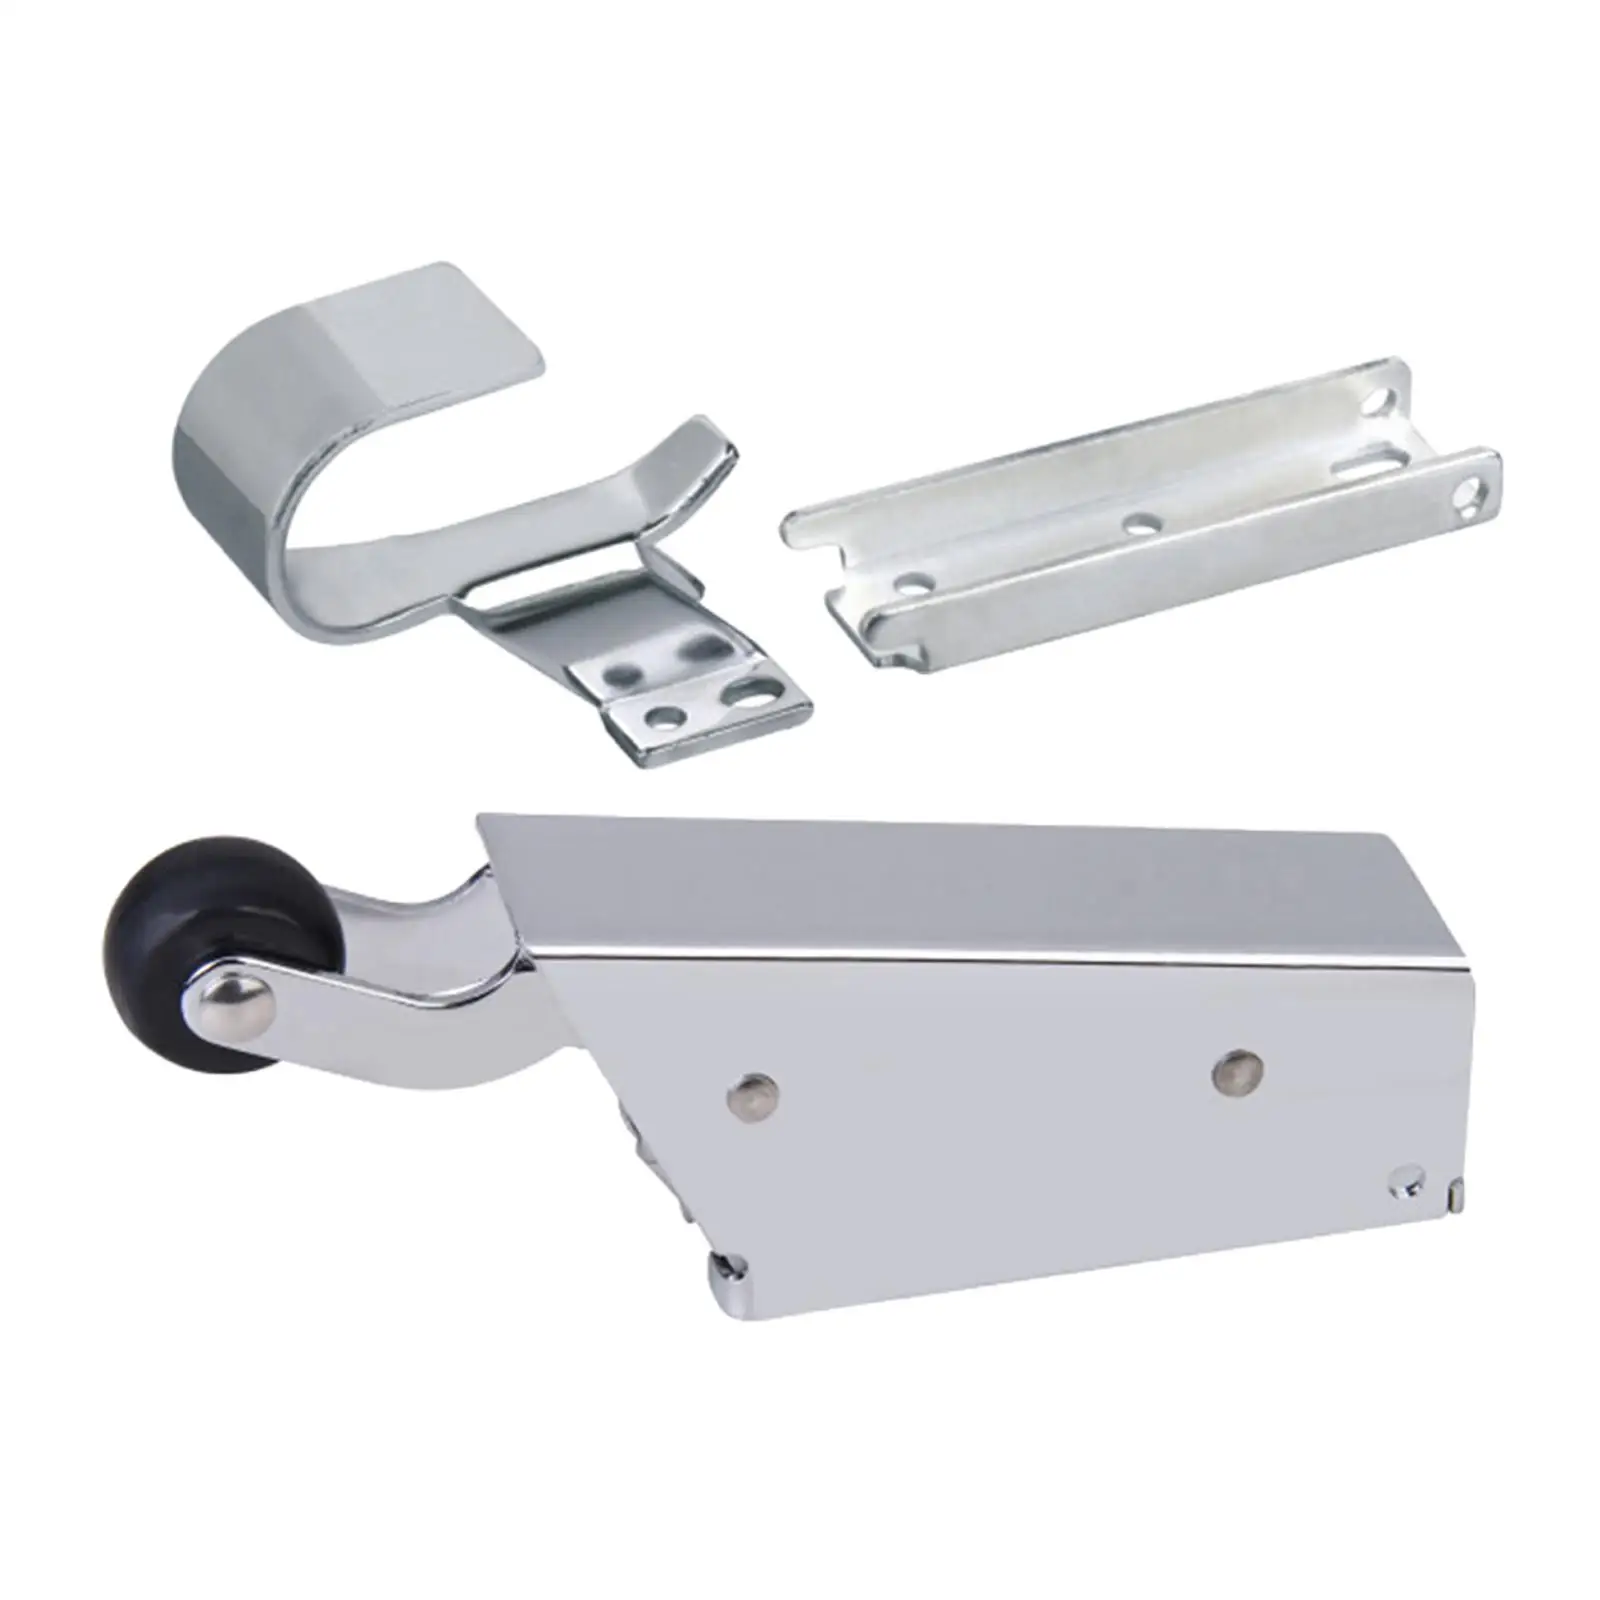 Spring Action Doors Closer Concealed Mounting Walk in Coolers Office Automatic Self Closing Adjustable Steel School